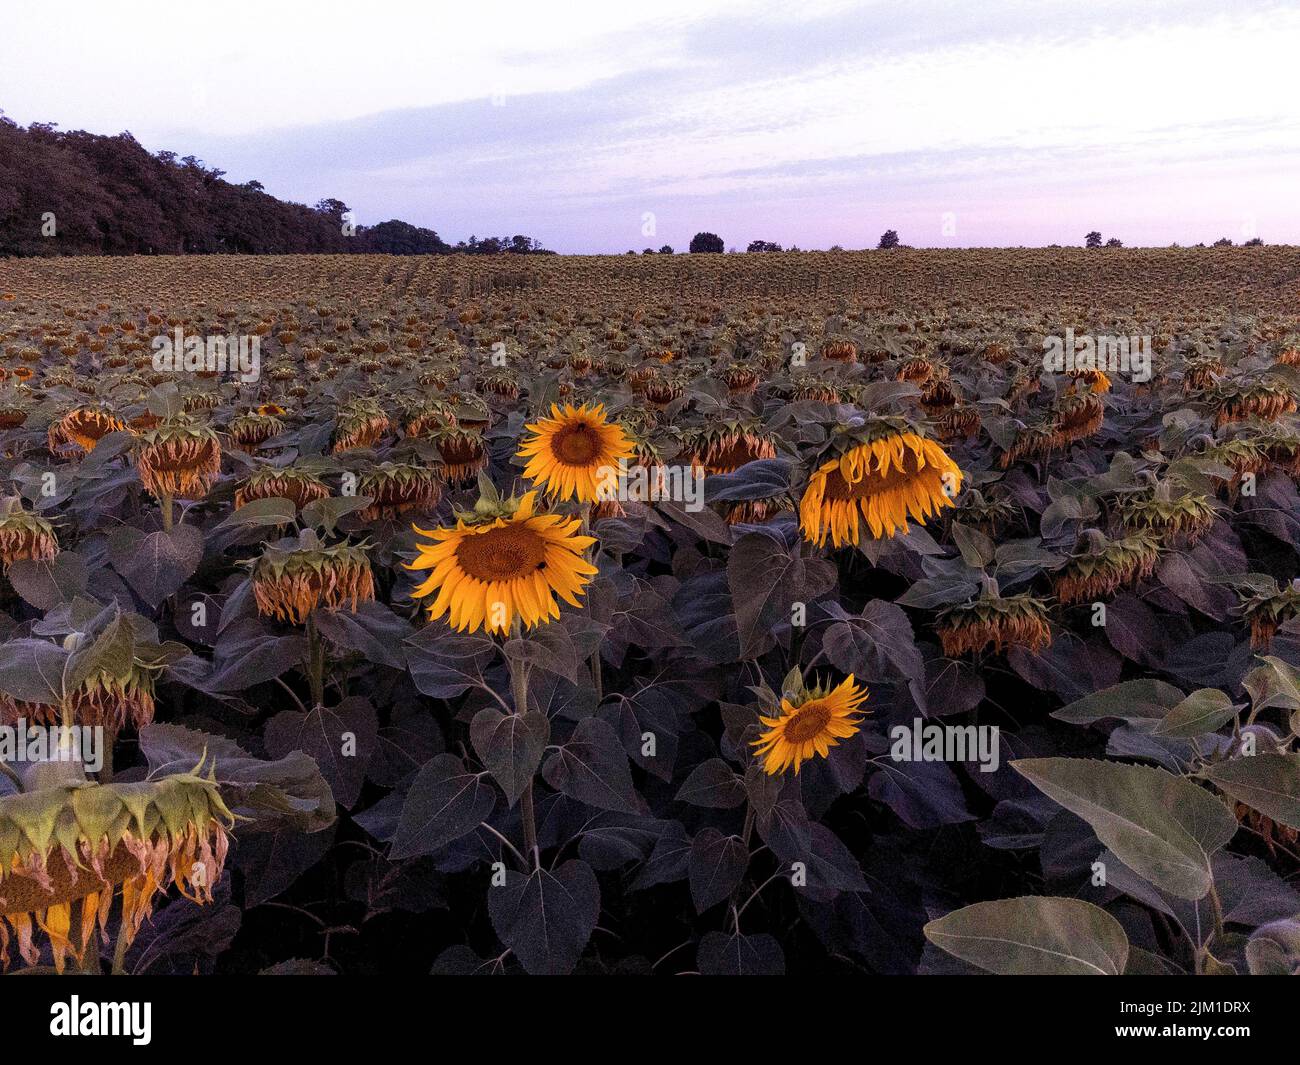 Strausberg, Germany. 04th Aug, 2022. Sunflowers bloom in a field. Of approximately 28,000 hectares of sunflower cultivation area in Germany, around 13,000 hectares are located in the state of Brandenburg. The concentration of the cultivation area, especially in eastern and southern Brandenburg, is based on the comparatively undemanding nature of sunflowers. Credit: Carsten Koall/dpa/Alamy Live News Stock Photo